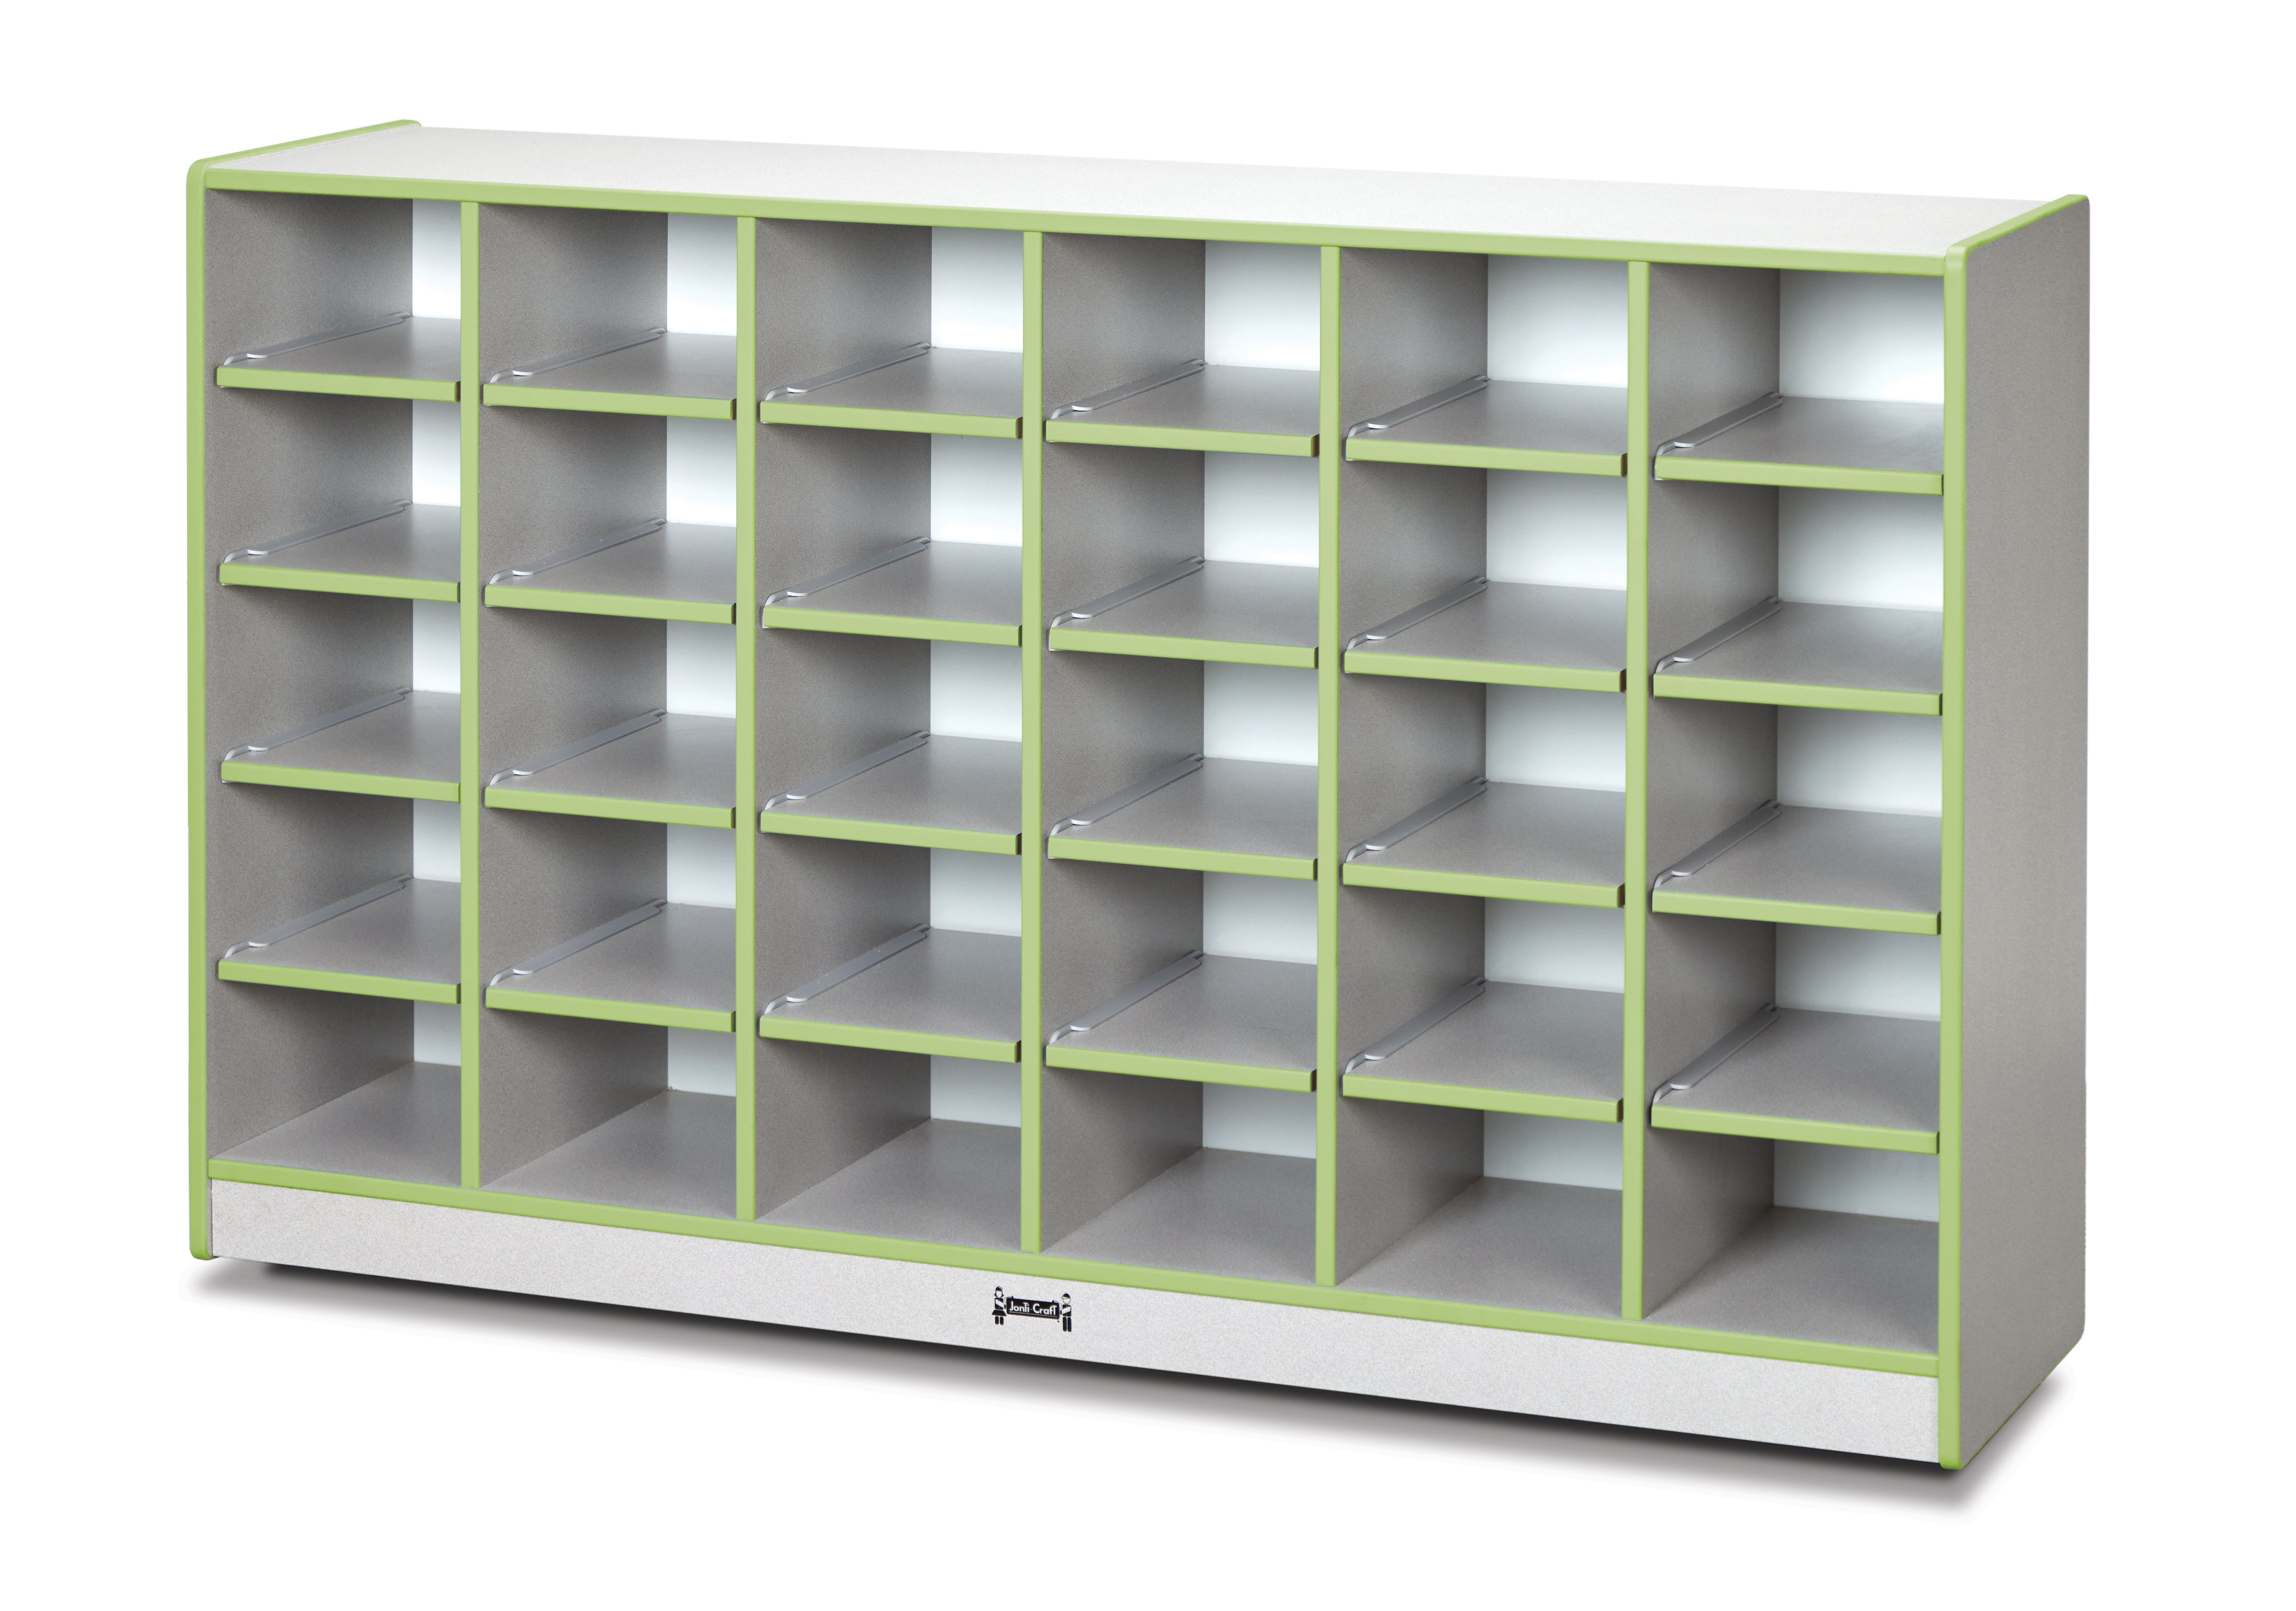 Rainbow Accents? 30 Cubbie-Tray Mobile Storage - with Trays - Key Lime Green